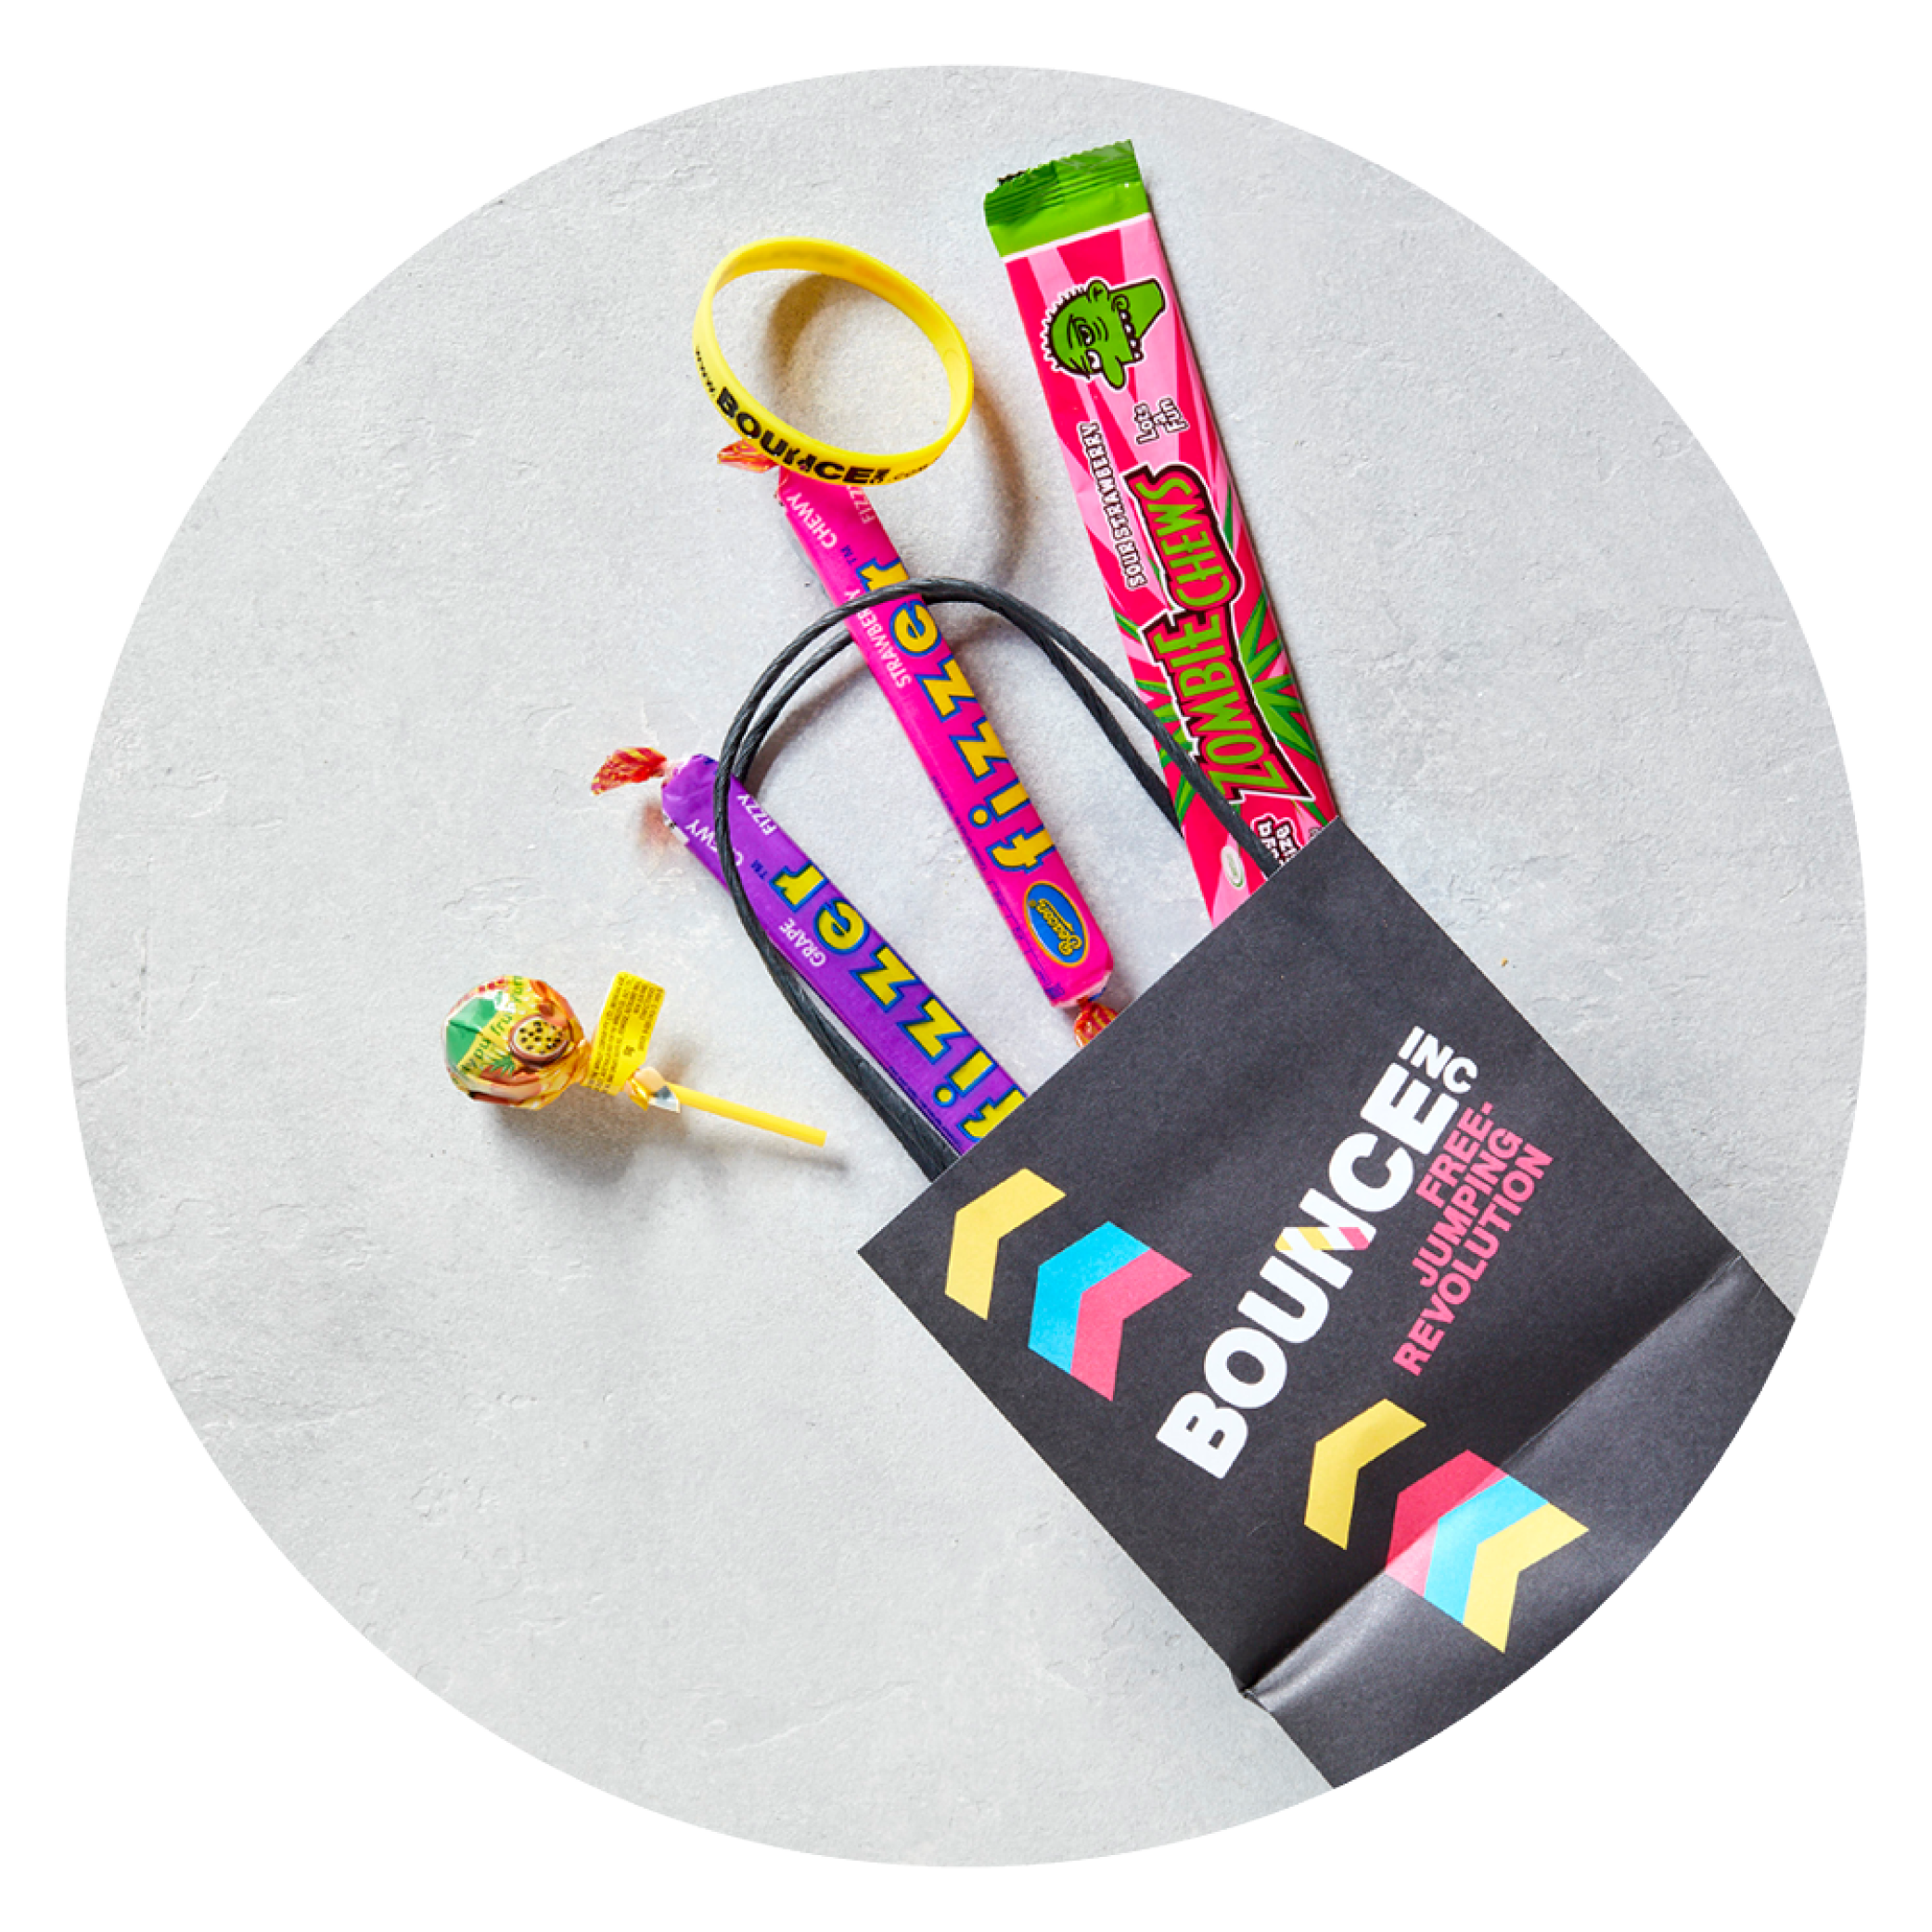 BOUNCE Party Bag

